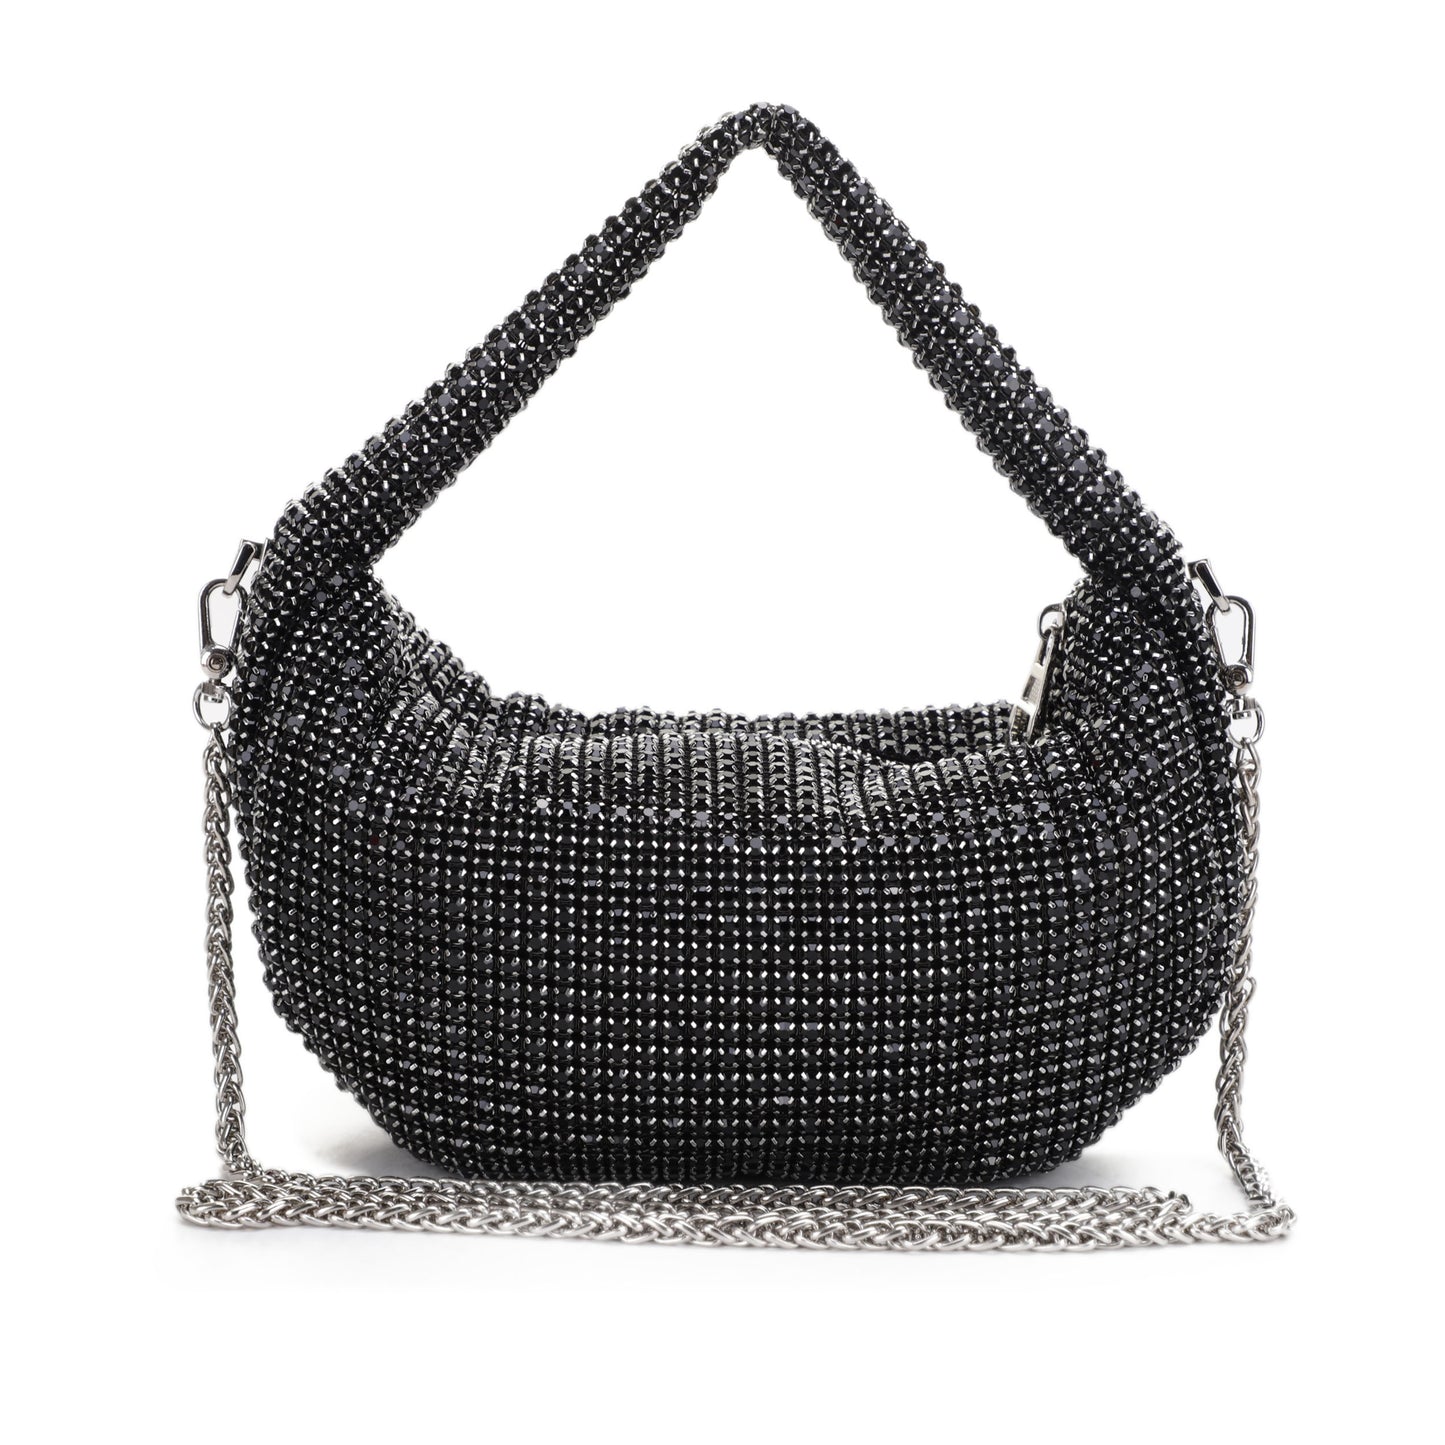 Izzy&Ali Stone Embellished Evening Hobo Bag with Chain Strap